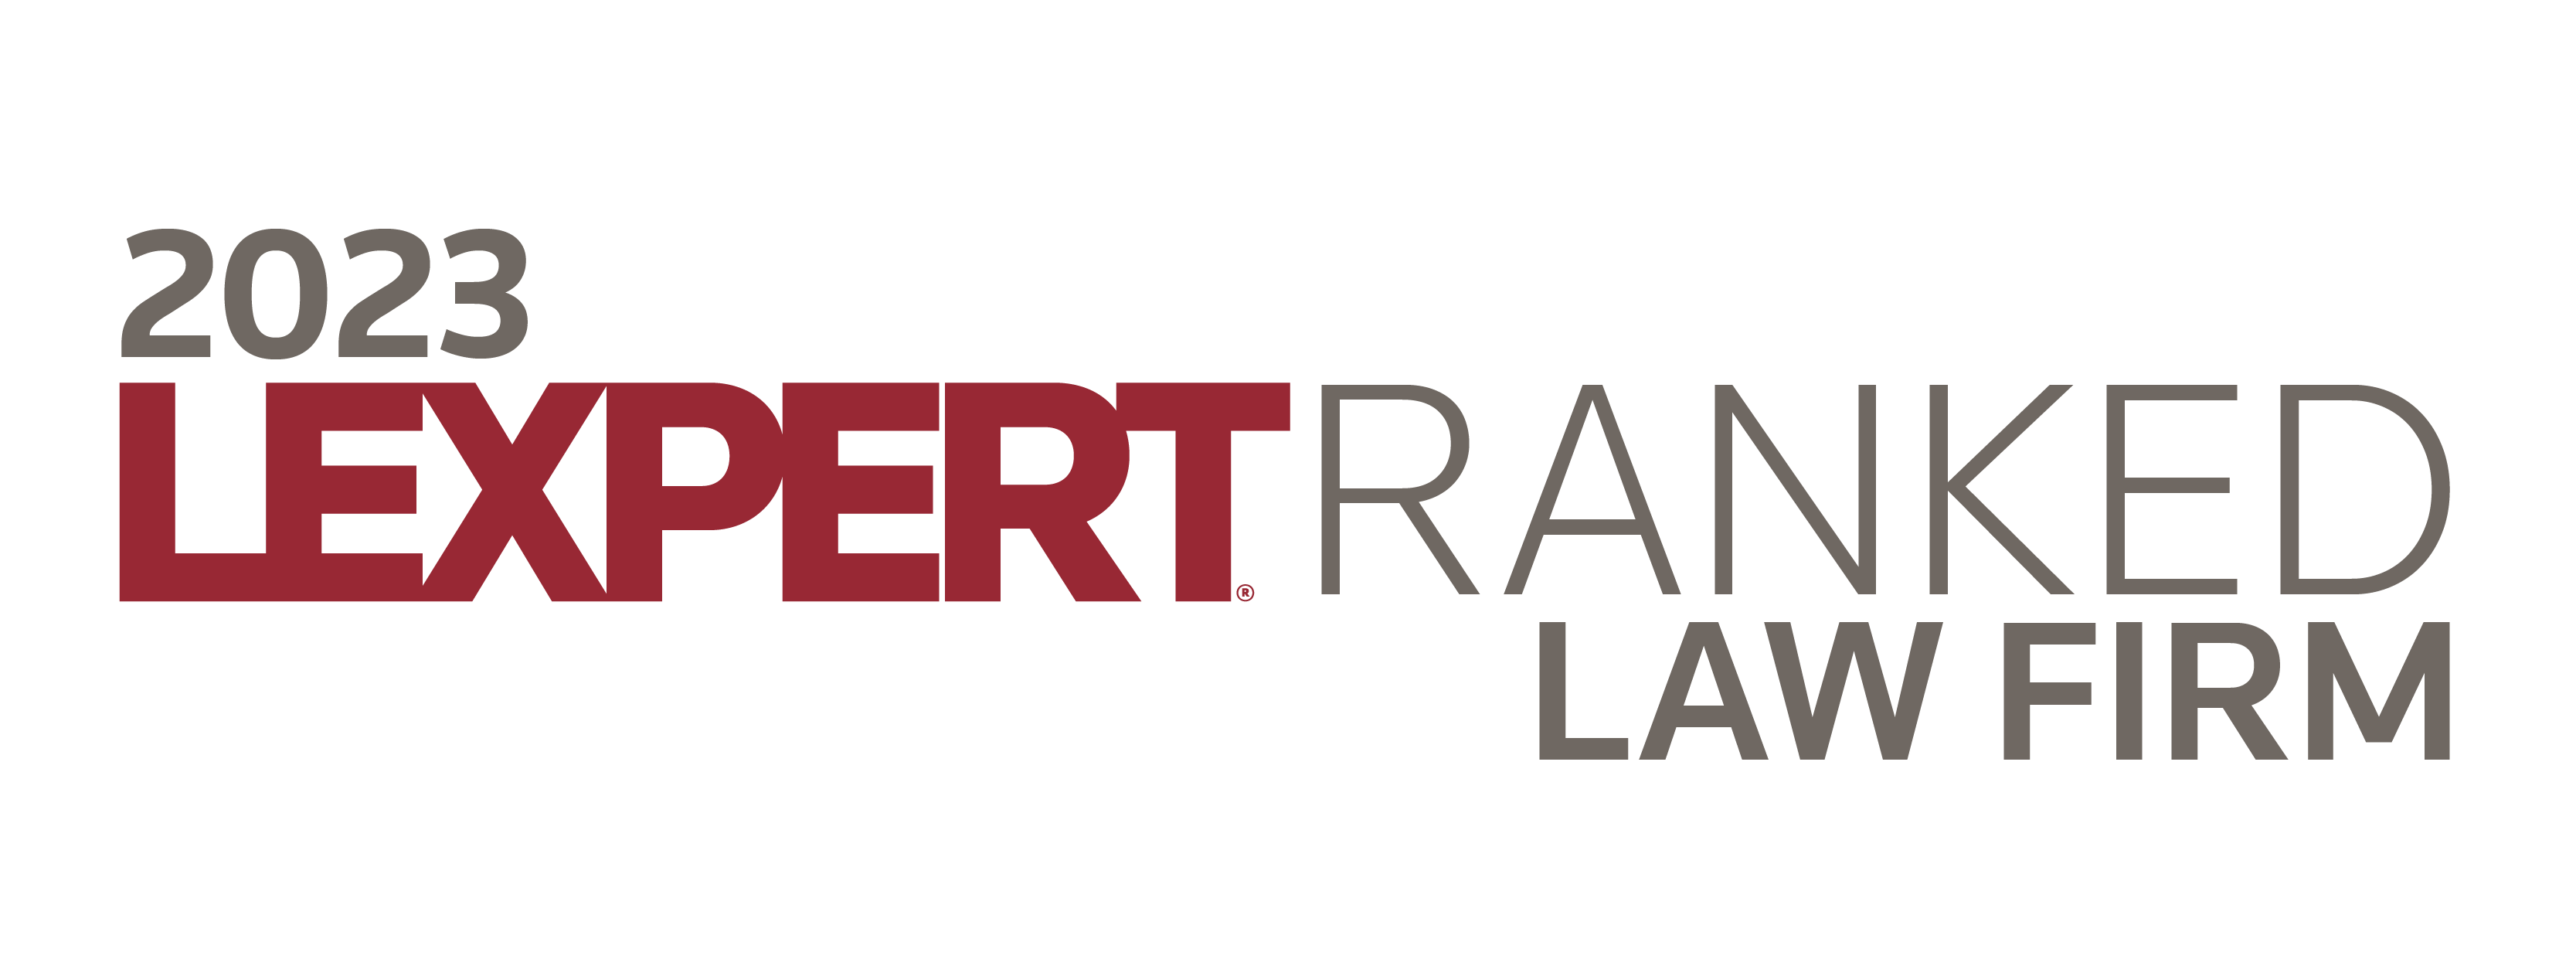 2023 LEXPERT-ranked Law Firm